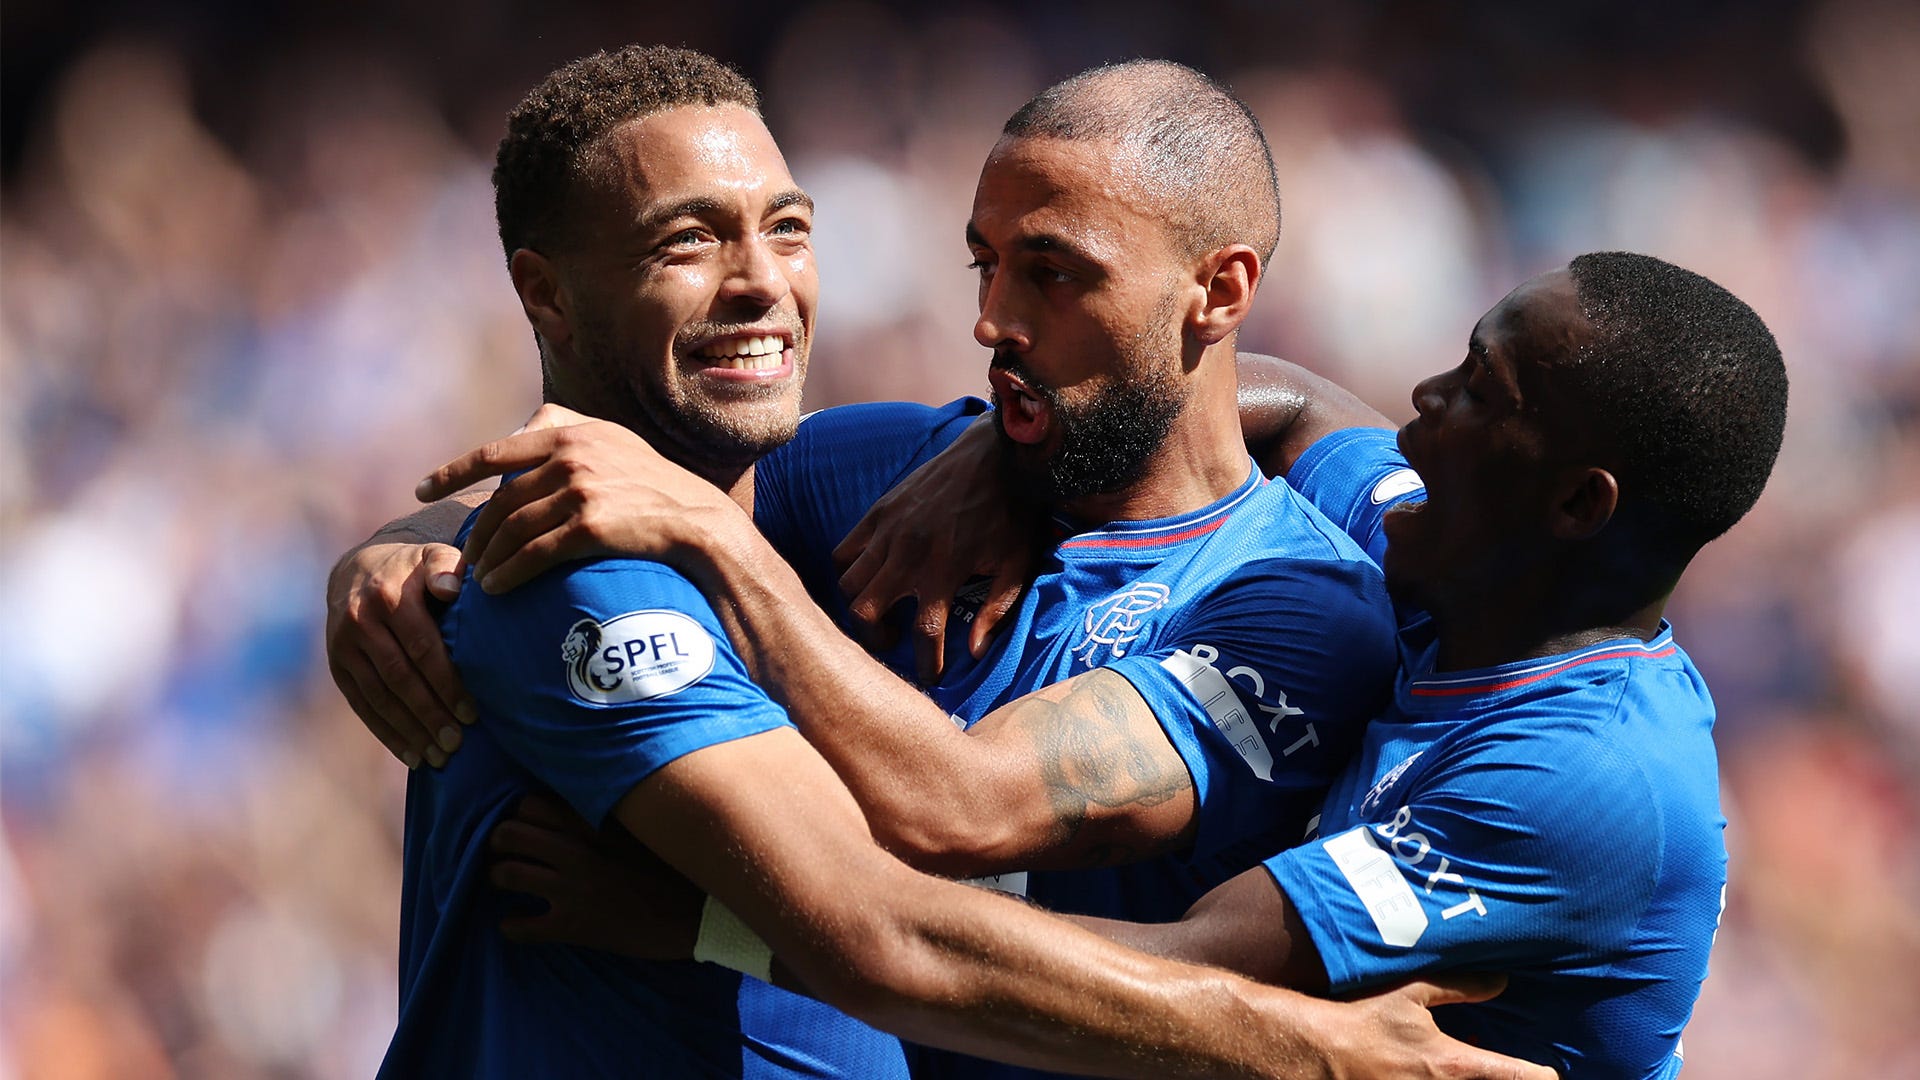 Rangers vs Real Betis Live stream, TV channel, kick-off time and where to watch Goal US